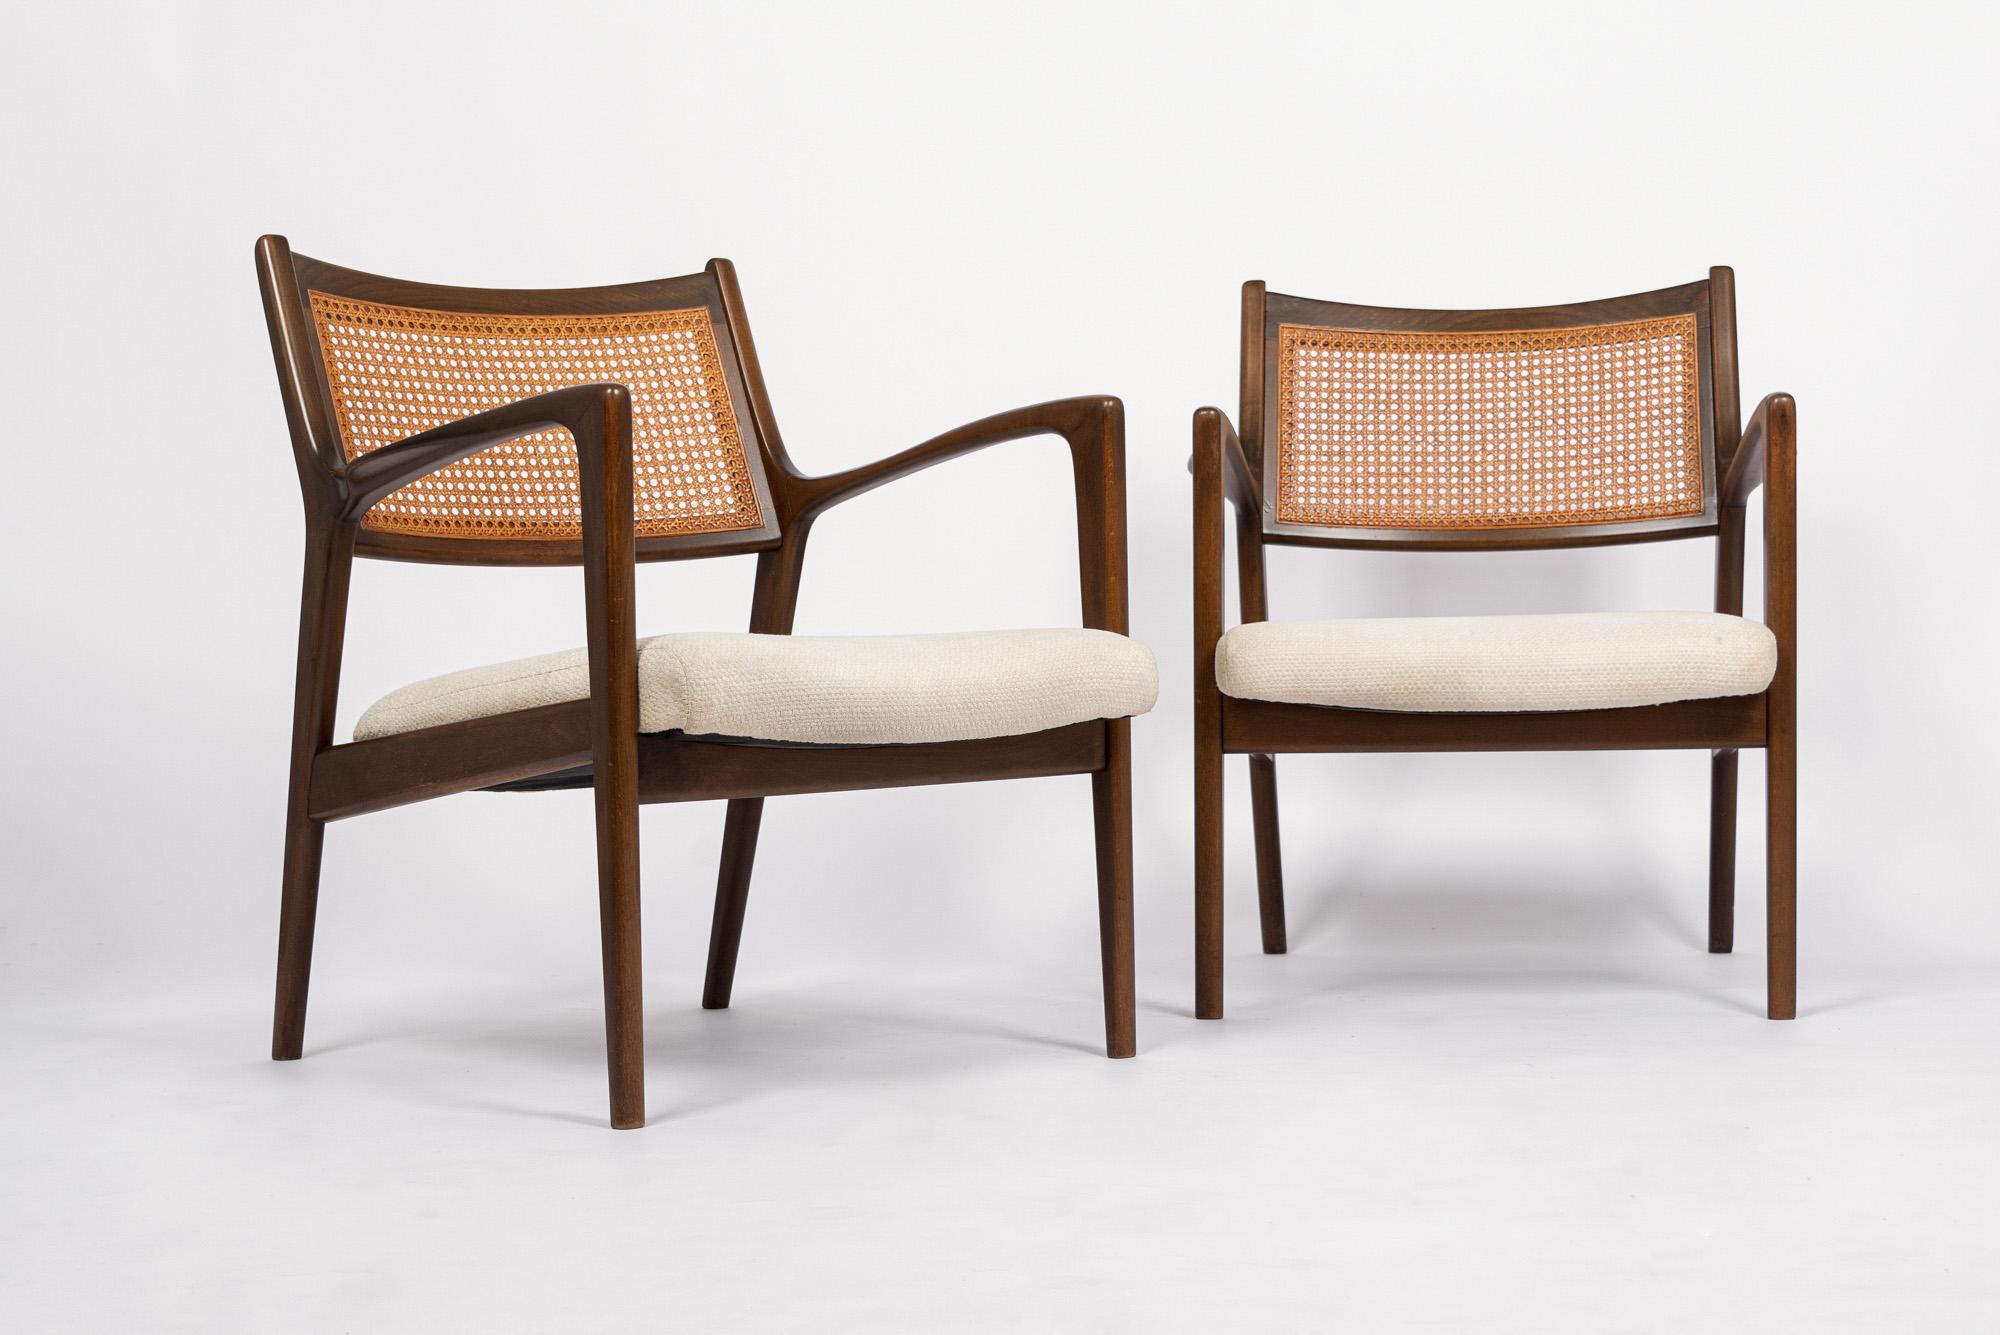 This beautiful pair of vintage mid century modern lounge chairs in the style of Jens Risom are circa 1960. The classic Scandinavian modern design has clean, minimalist lines and elegant curves and a striking sculptural profile. The lounge chairs